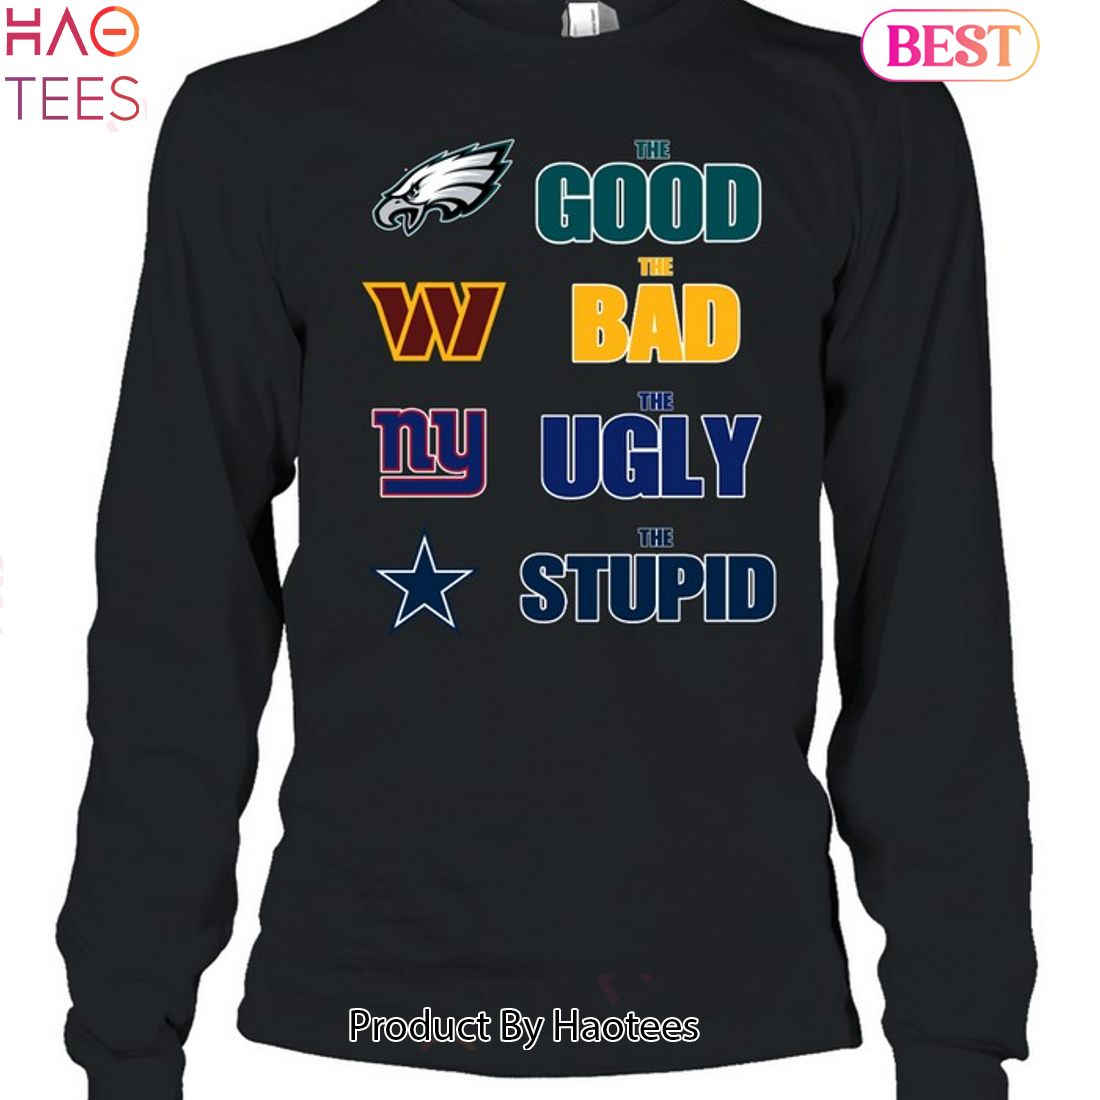 Philadelphia Eagles The Good The Bad The Ugly And The Stupid